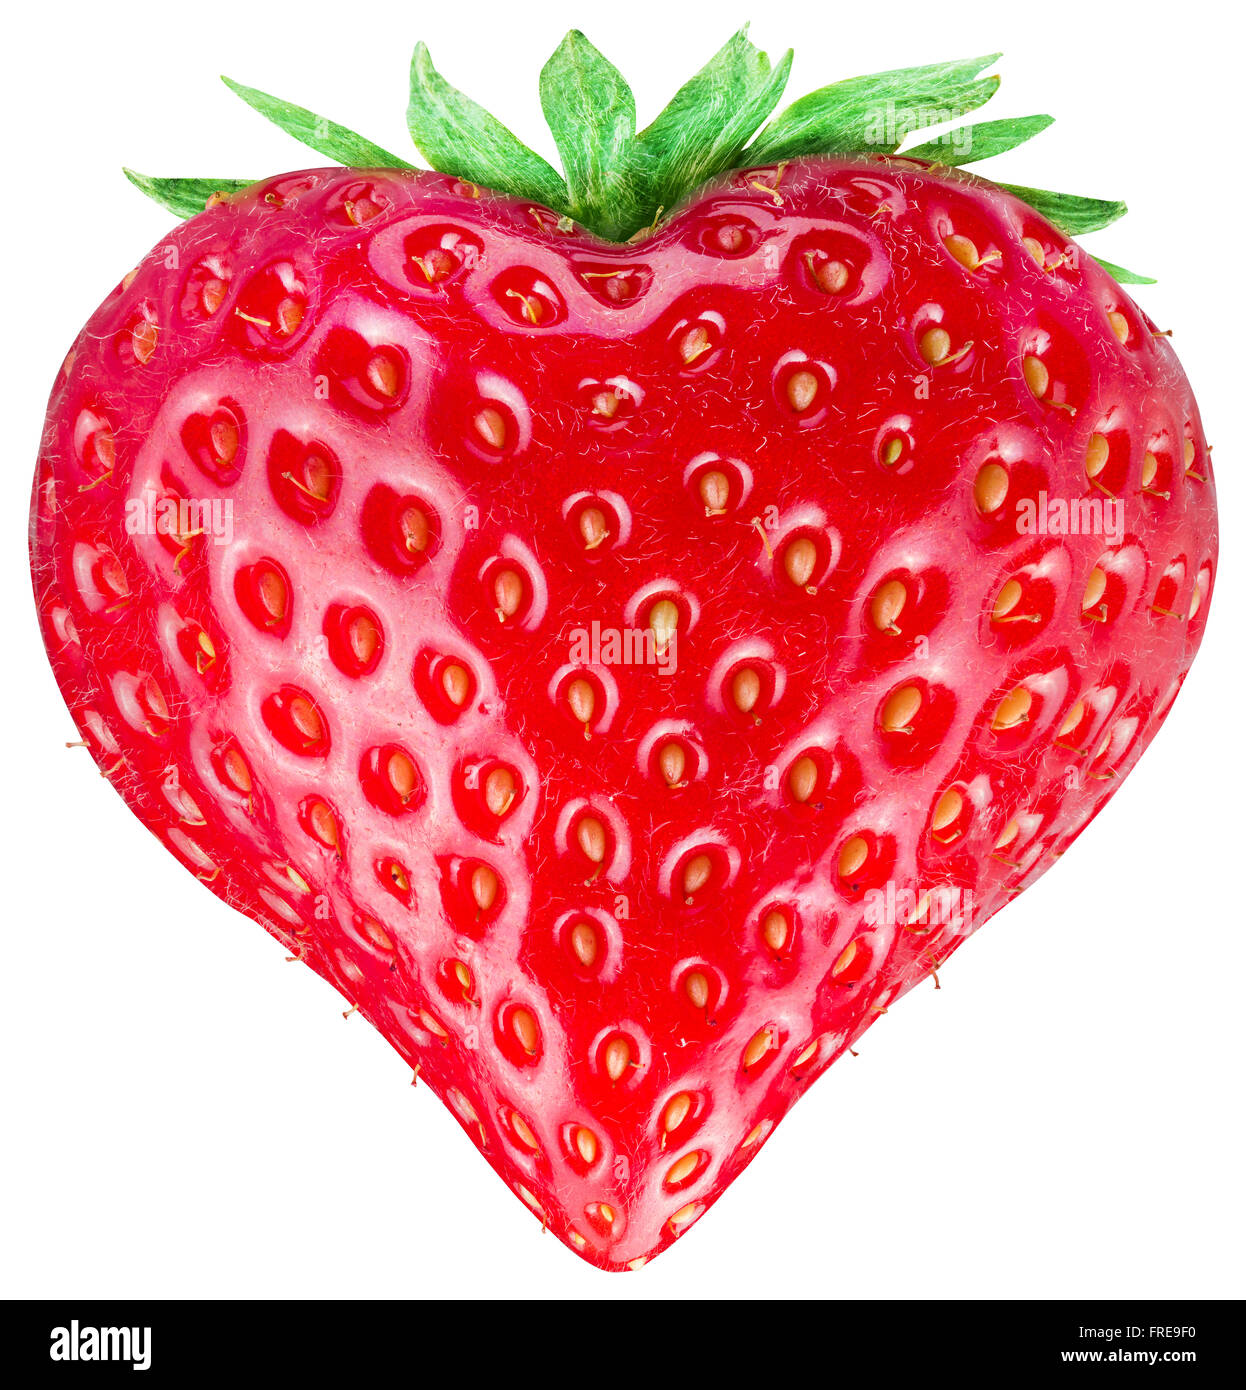 Strawberry heart. Isolated on a white background. Clipping path. Stock Photo